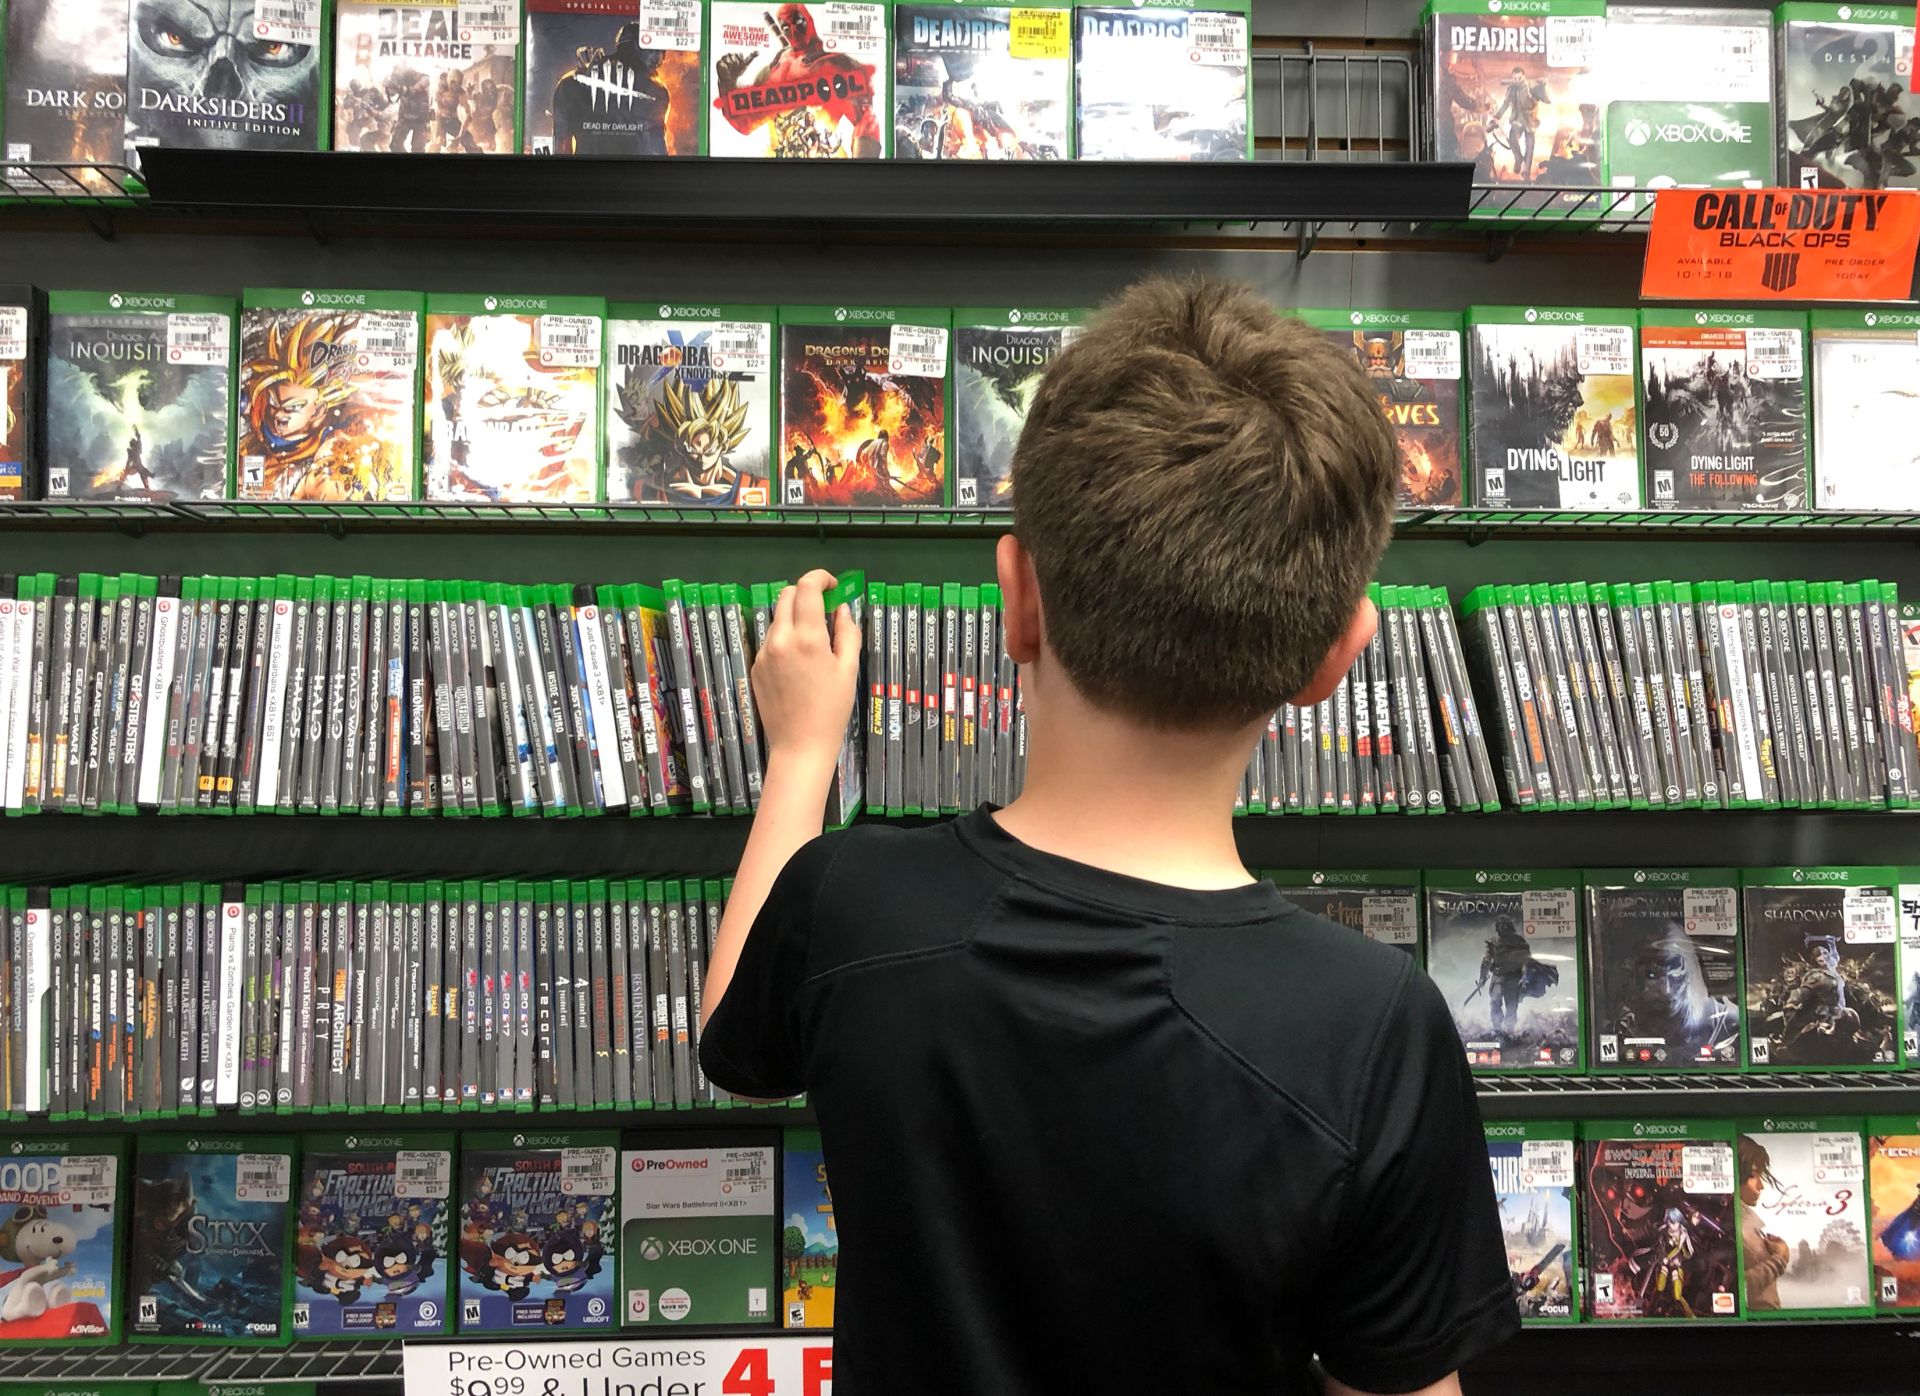 Video Games Store